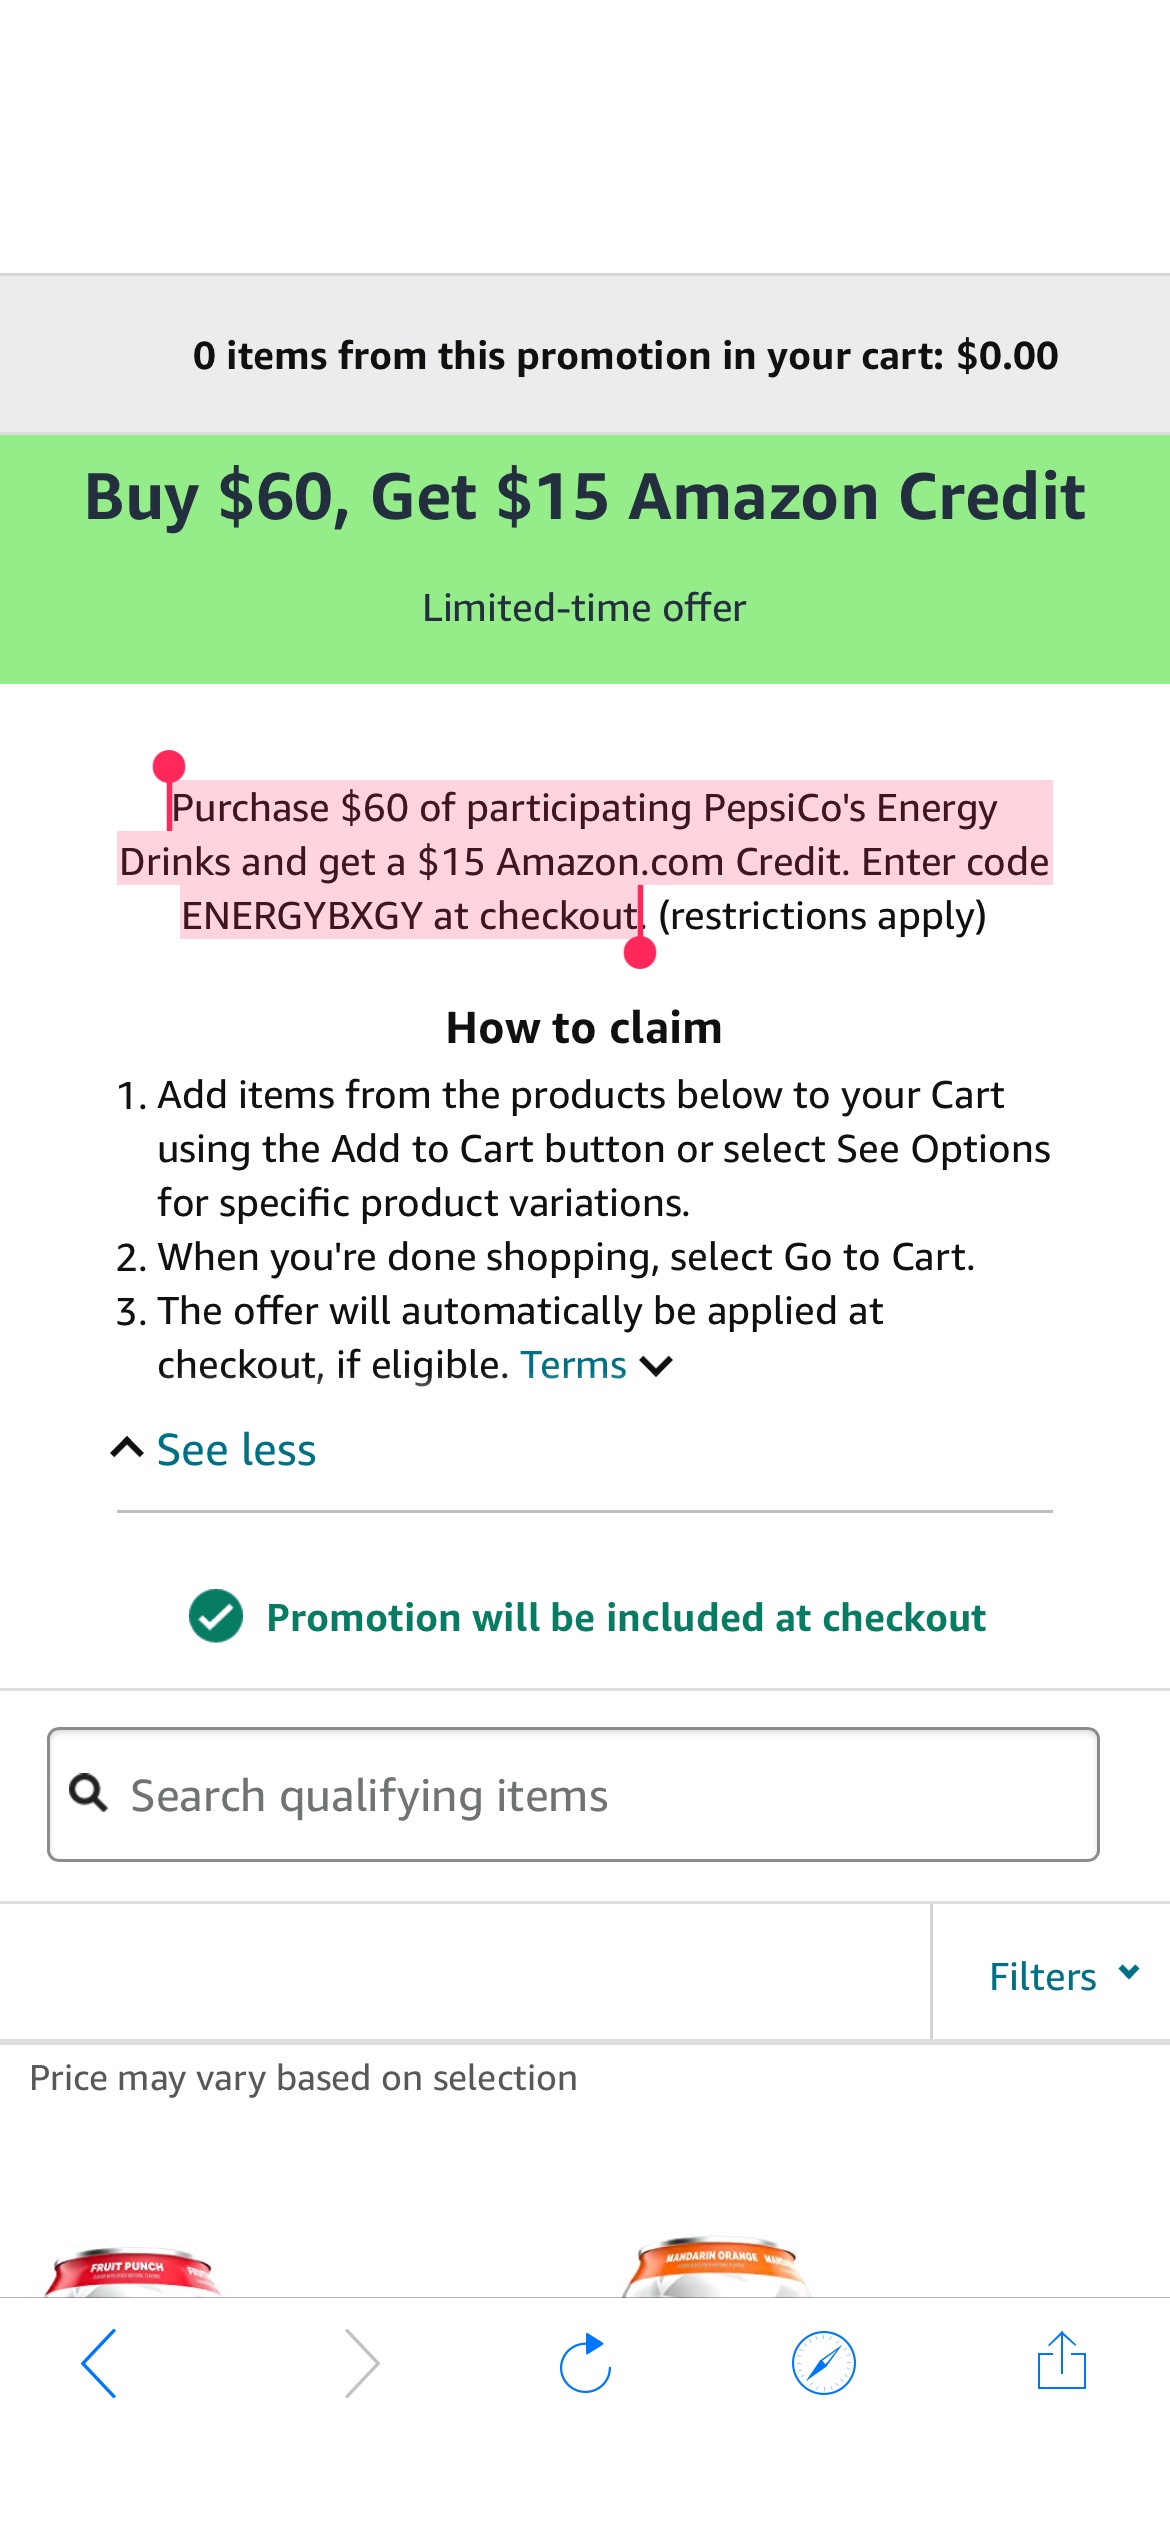 Purchase $60 of participating PepsiCo's Energy Drinks and get a $15 Amazon.com Credit. Enter code ENERGYBXGY at checkout